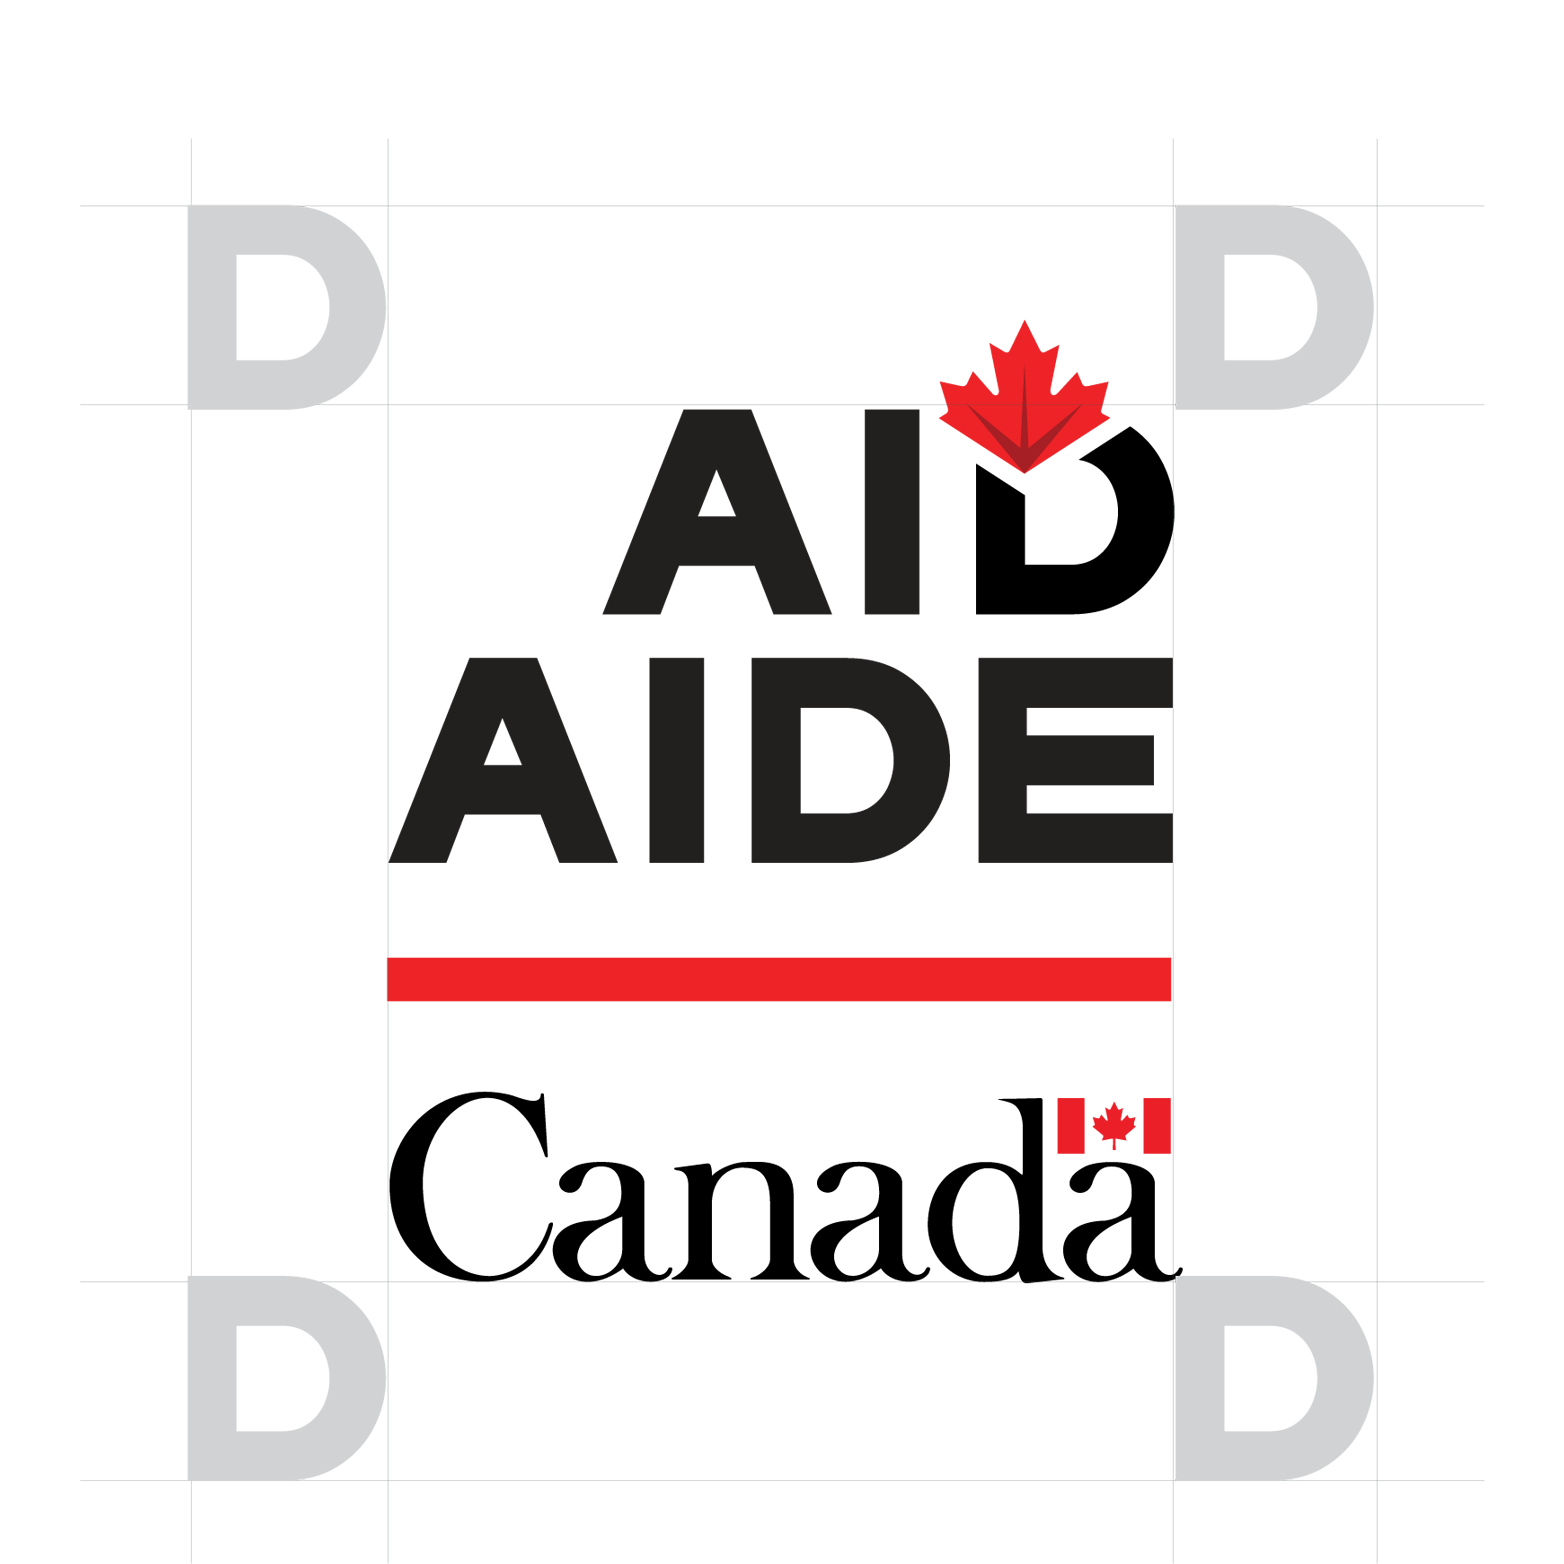 The graphic elements of the Canada Aid signature are shown in the centre of the graphic: the word “Aid” in all-caps with a maple leaf affixed to the top of the “D”, the French equivalent “Aide” underneath, a red horizontal line, and the Canada Wordmark. The graphic is framed by grey lines, and the “D” of the word Aid is reproduced on each side of the graphic, to demonstrate that the clear space around the graphic should be equivalent to that height and width.